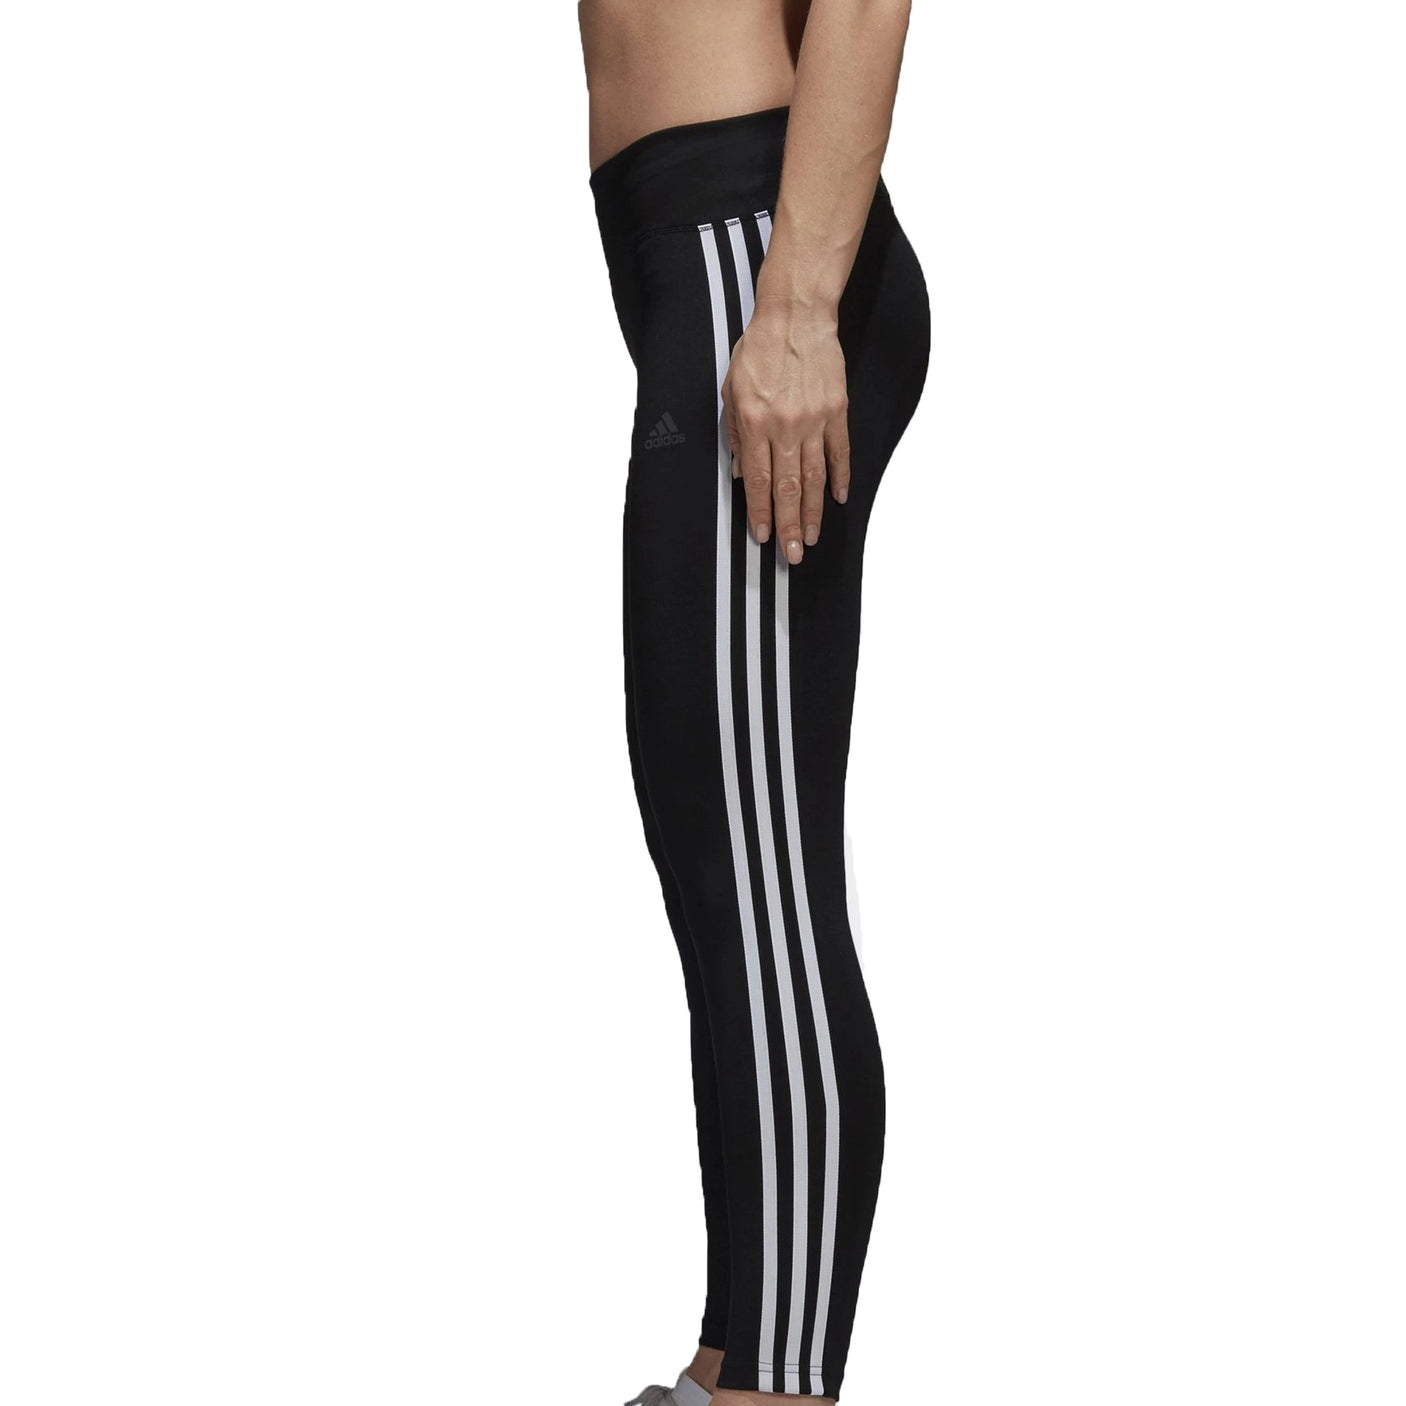 Buy adidas Women's Training Ultimate Climalite Long Tights (XL- Trace  Cargo) Online - Best Price adidas Women's Training Ultimate Climalite Long  Tights (XL- Trace Cargo) - Justdial Shop Online.